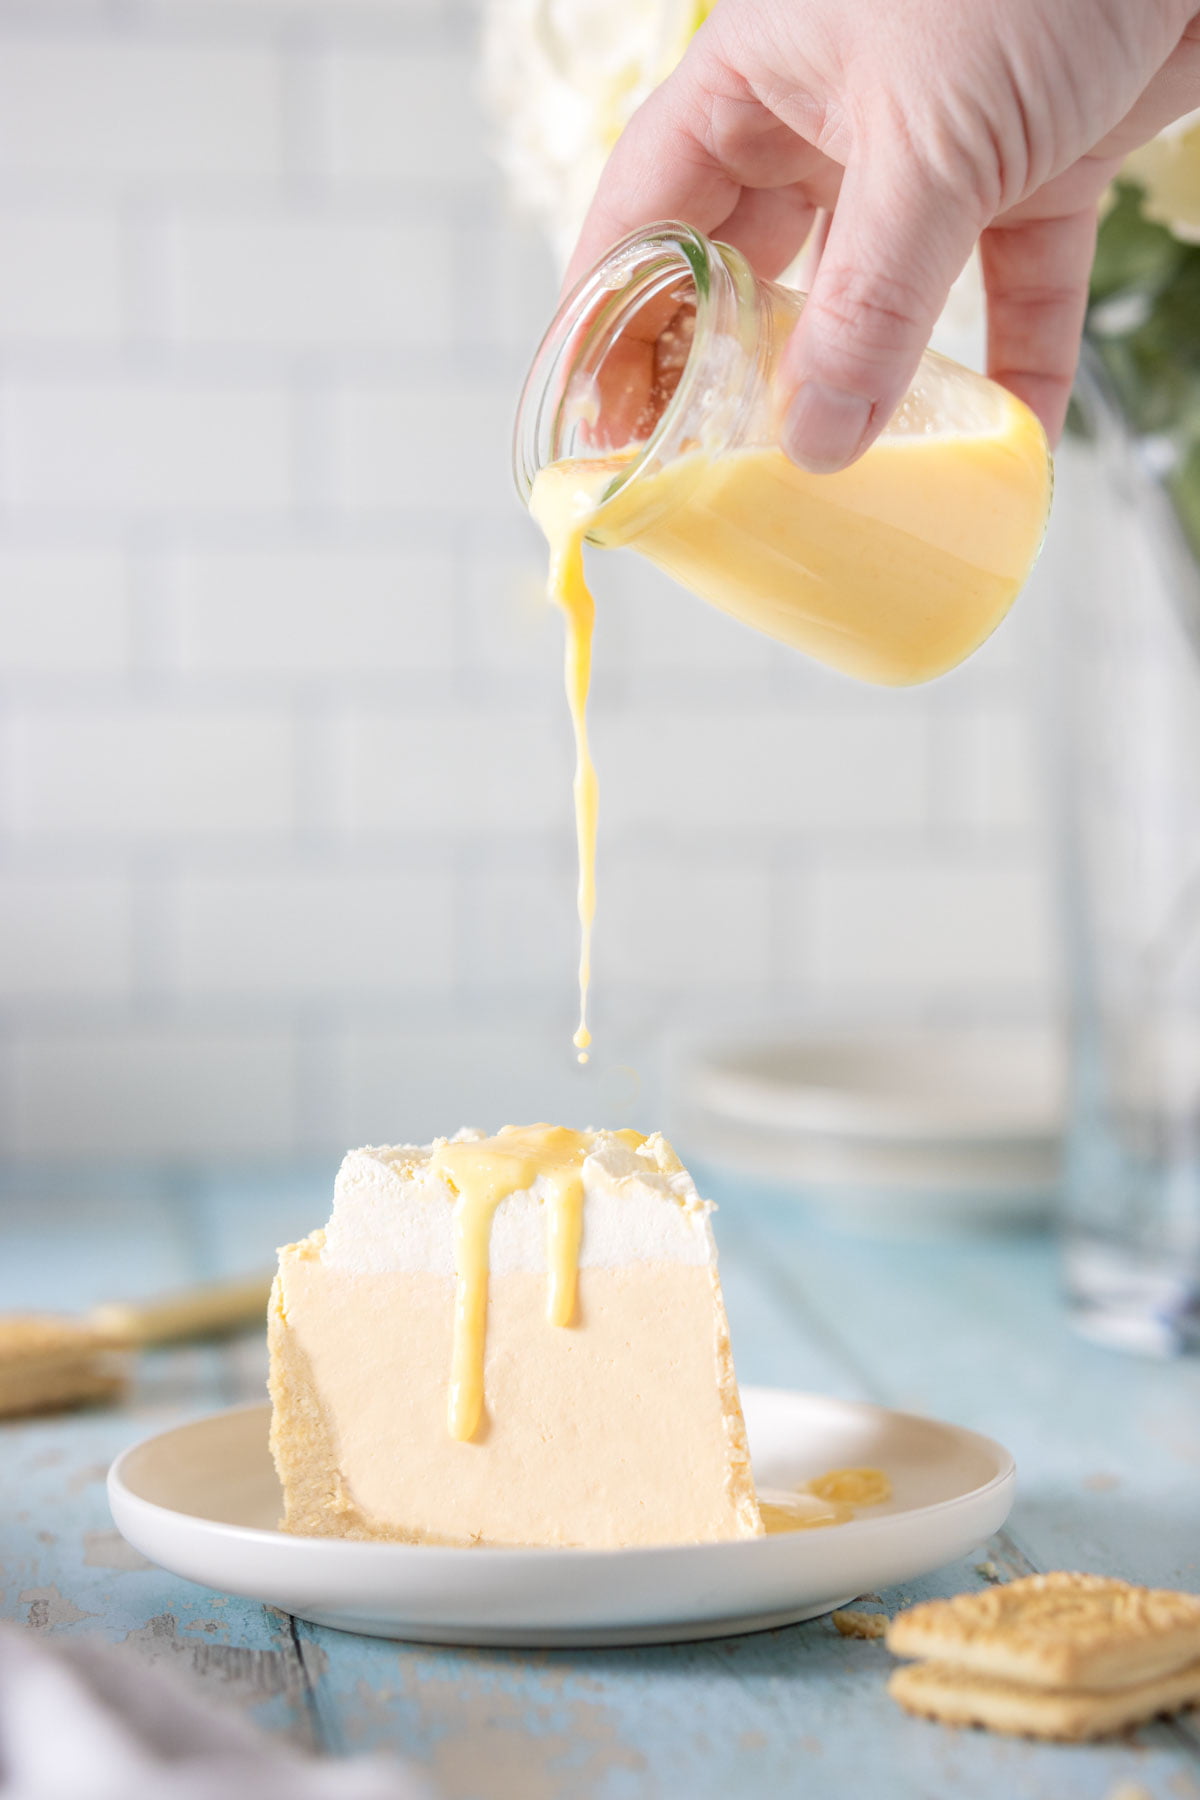 Custard being poured over a slice of no bake cheesecake